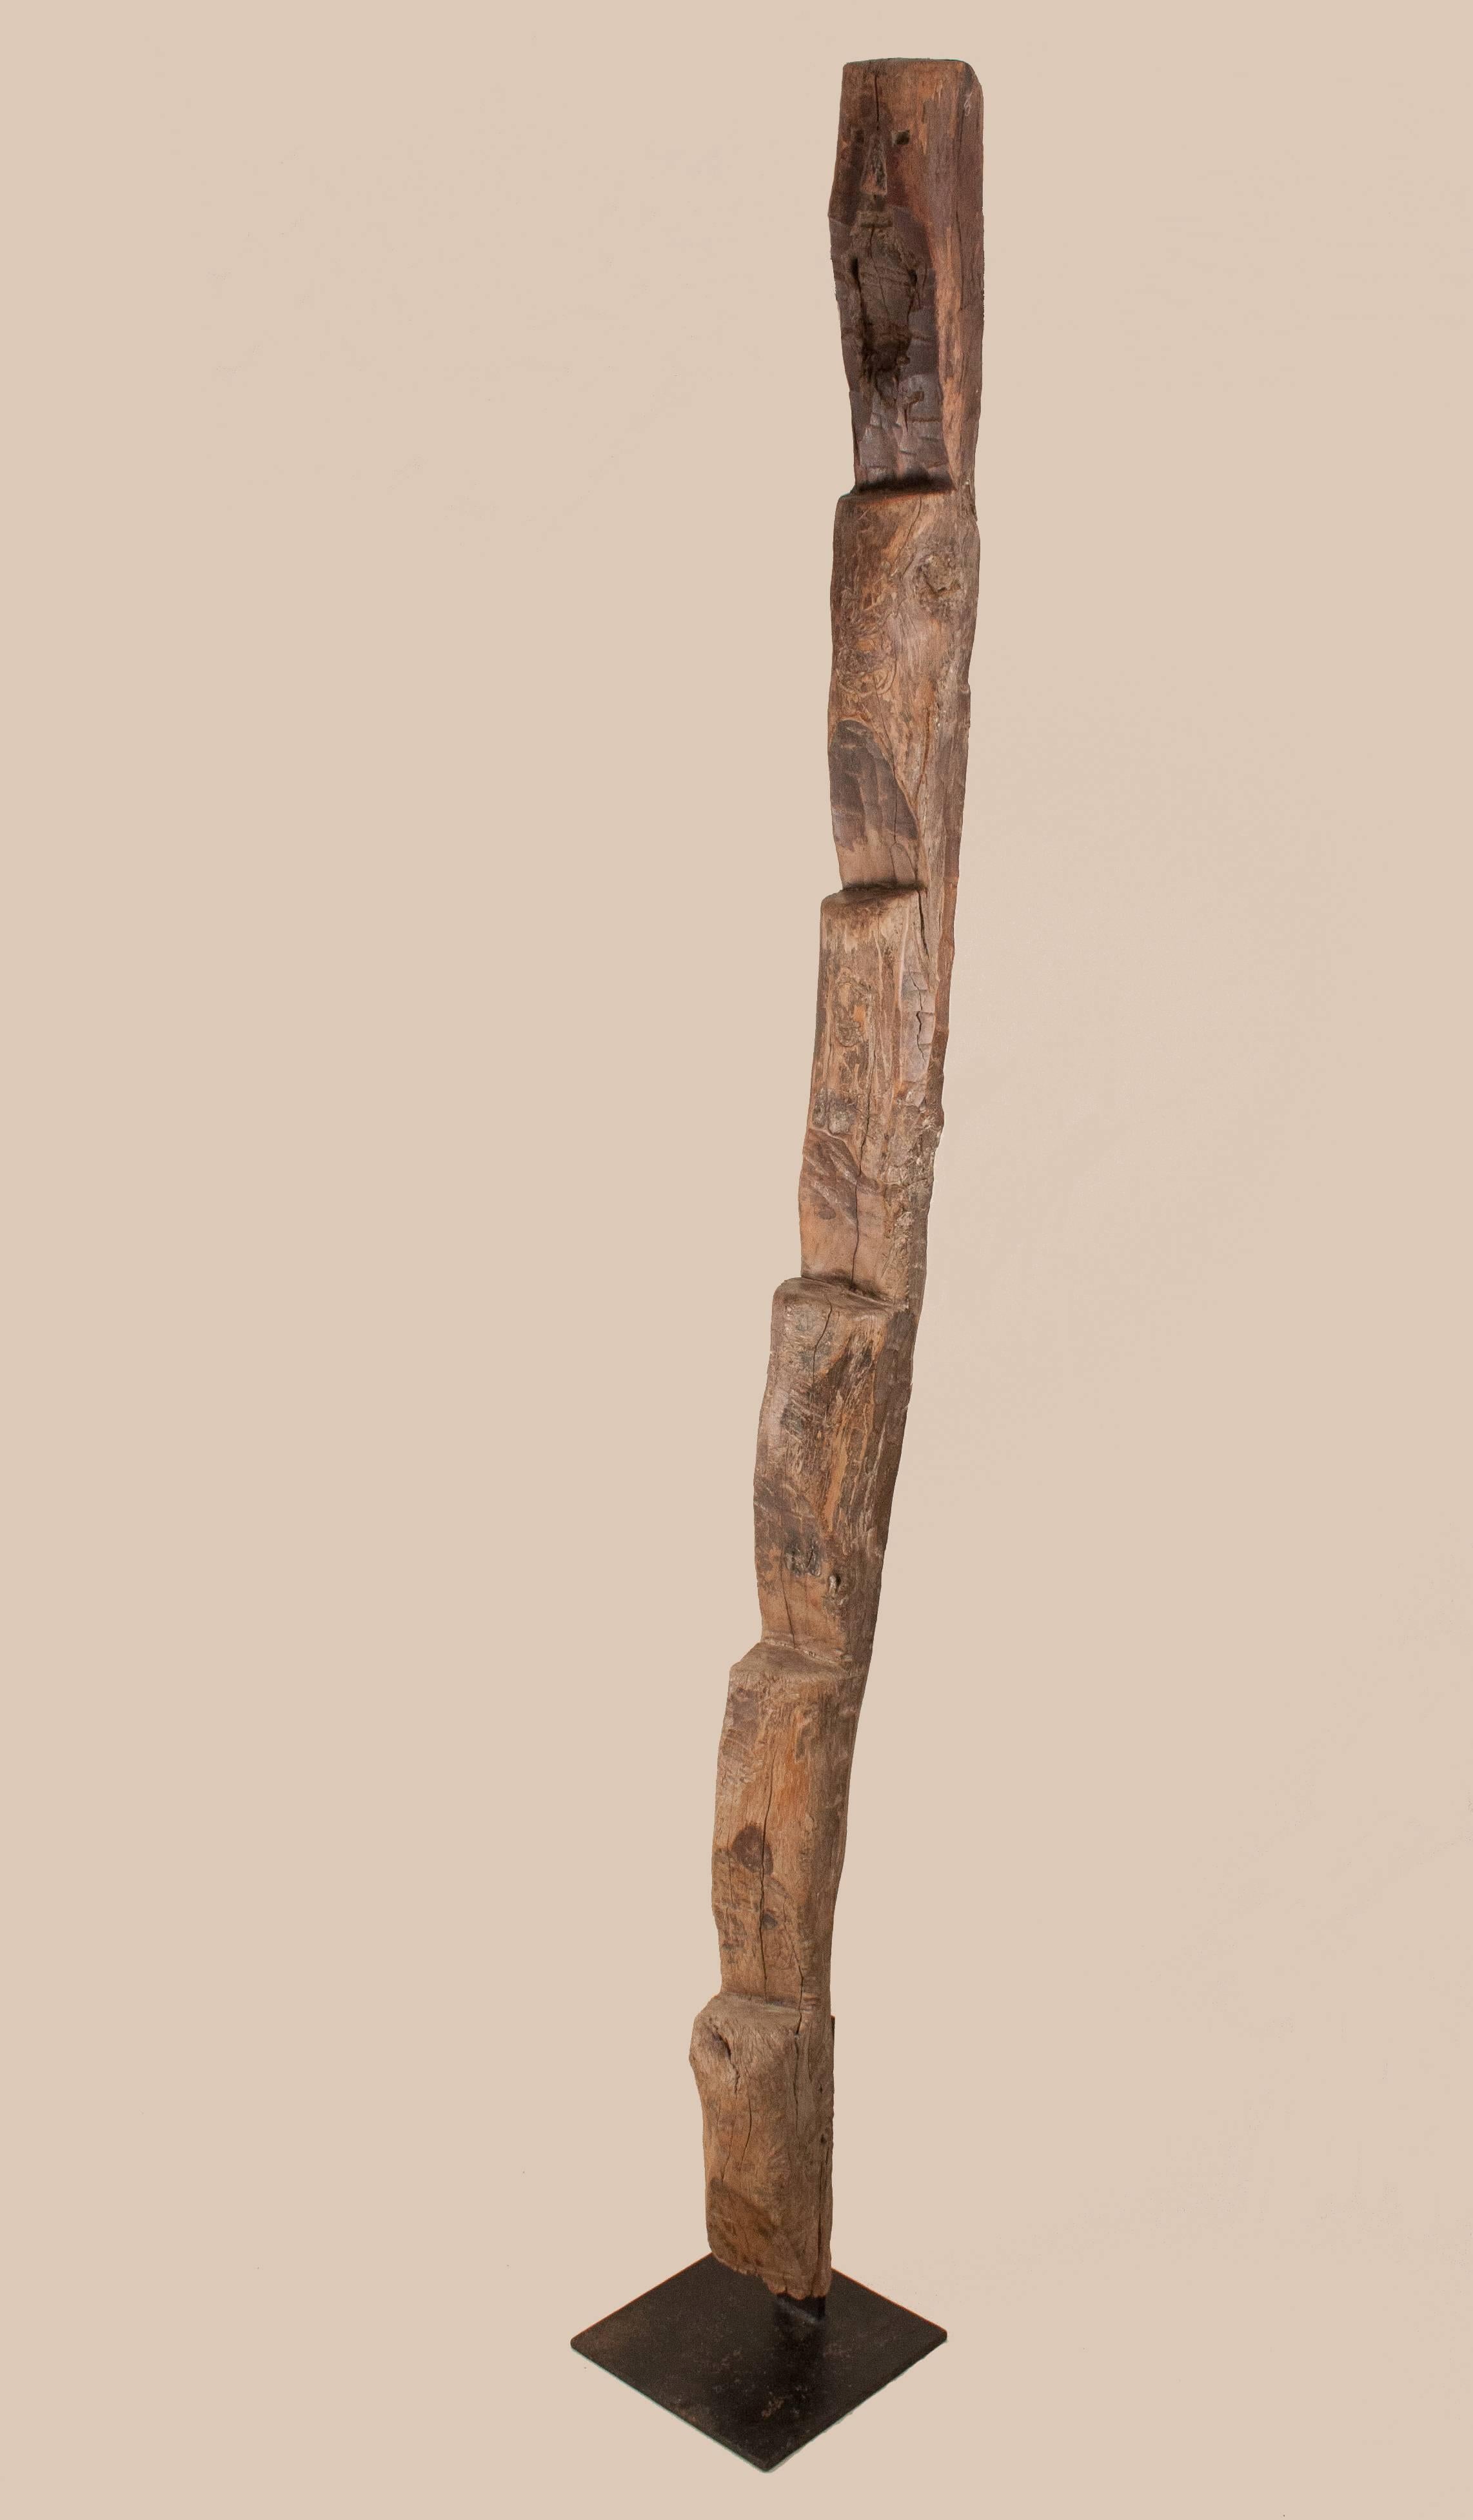 An exotic hardwood ladder from Nagaland in Northeast India. This seven-foot functional sculpture features a primitively carved face. The ladder is solidly mounted on a black iron base. Originally used to climb to raised dwellings, this hand-carved